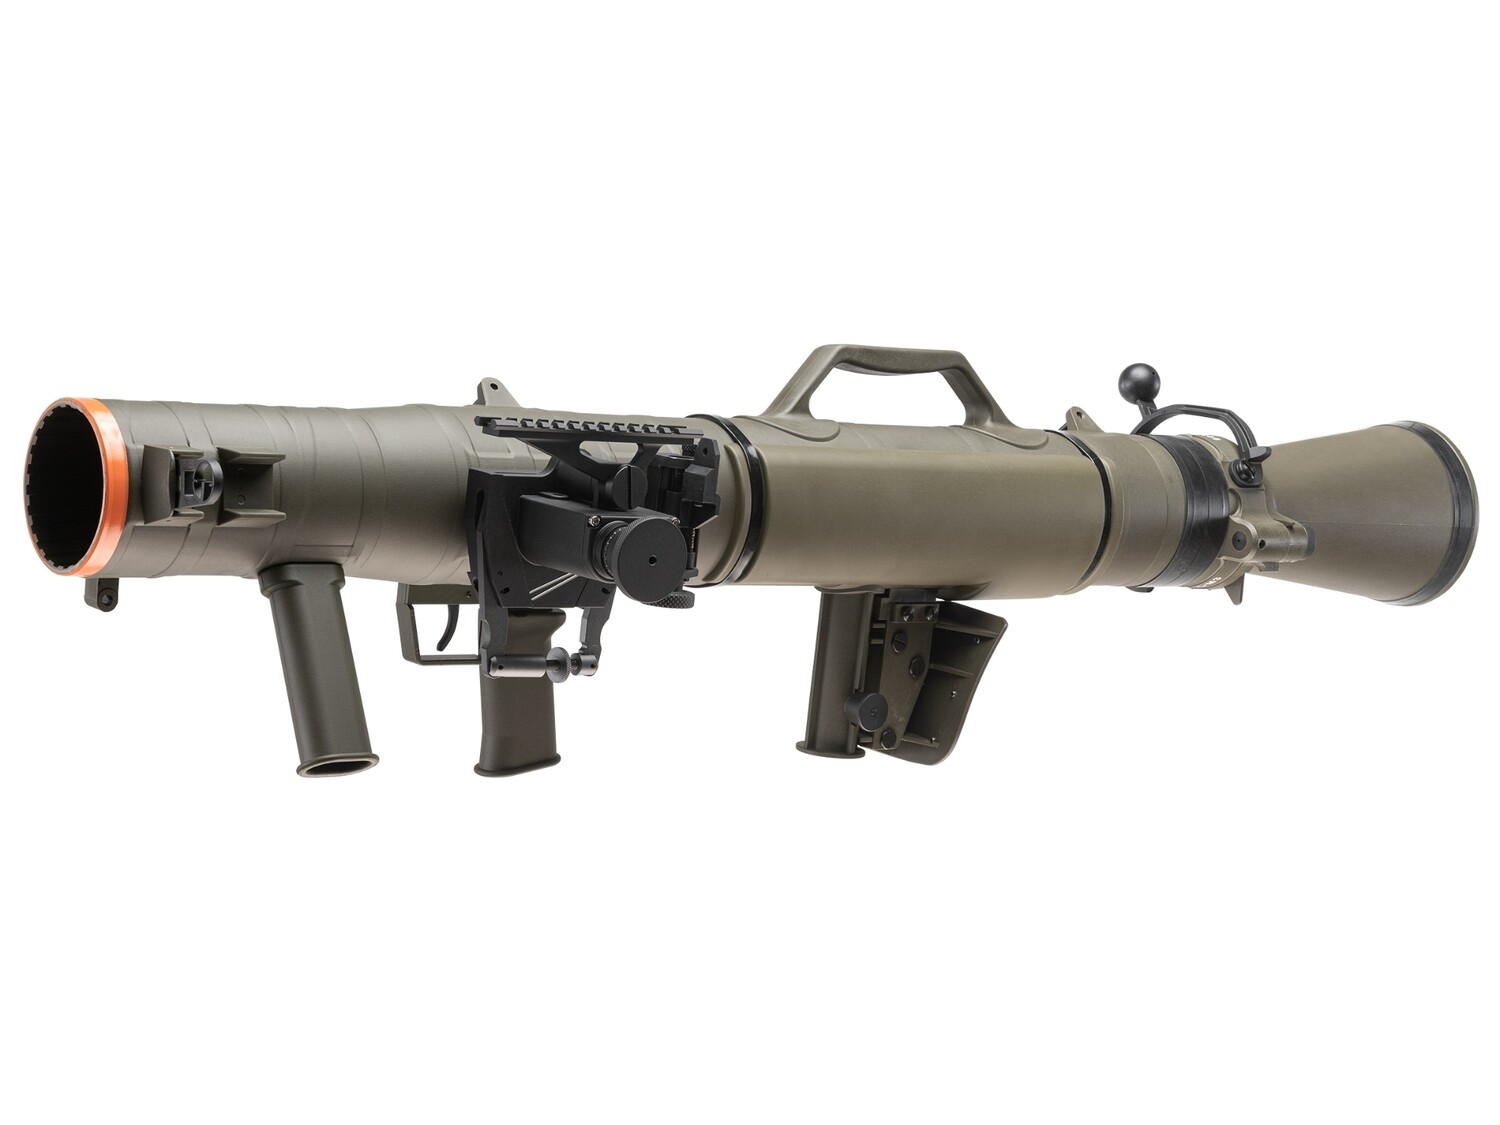 Elite Force / VFC M3 "Carl Gustaf" MAAWS Recoilless Rifle Rocket Launcher